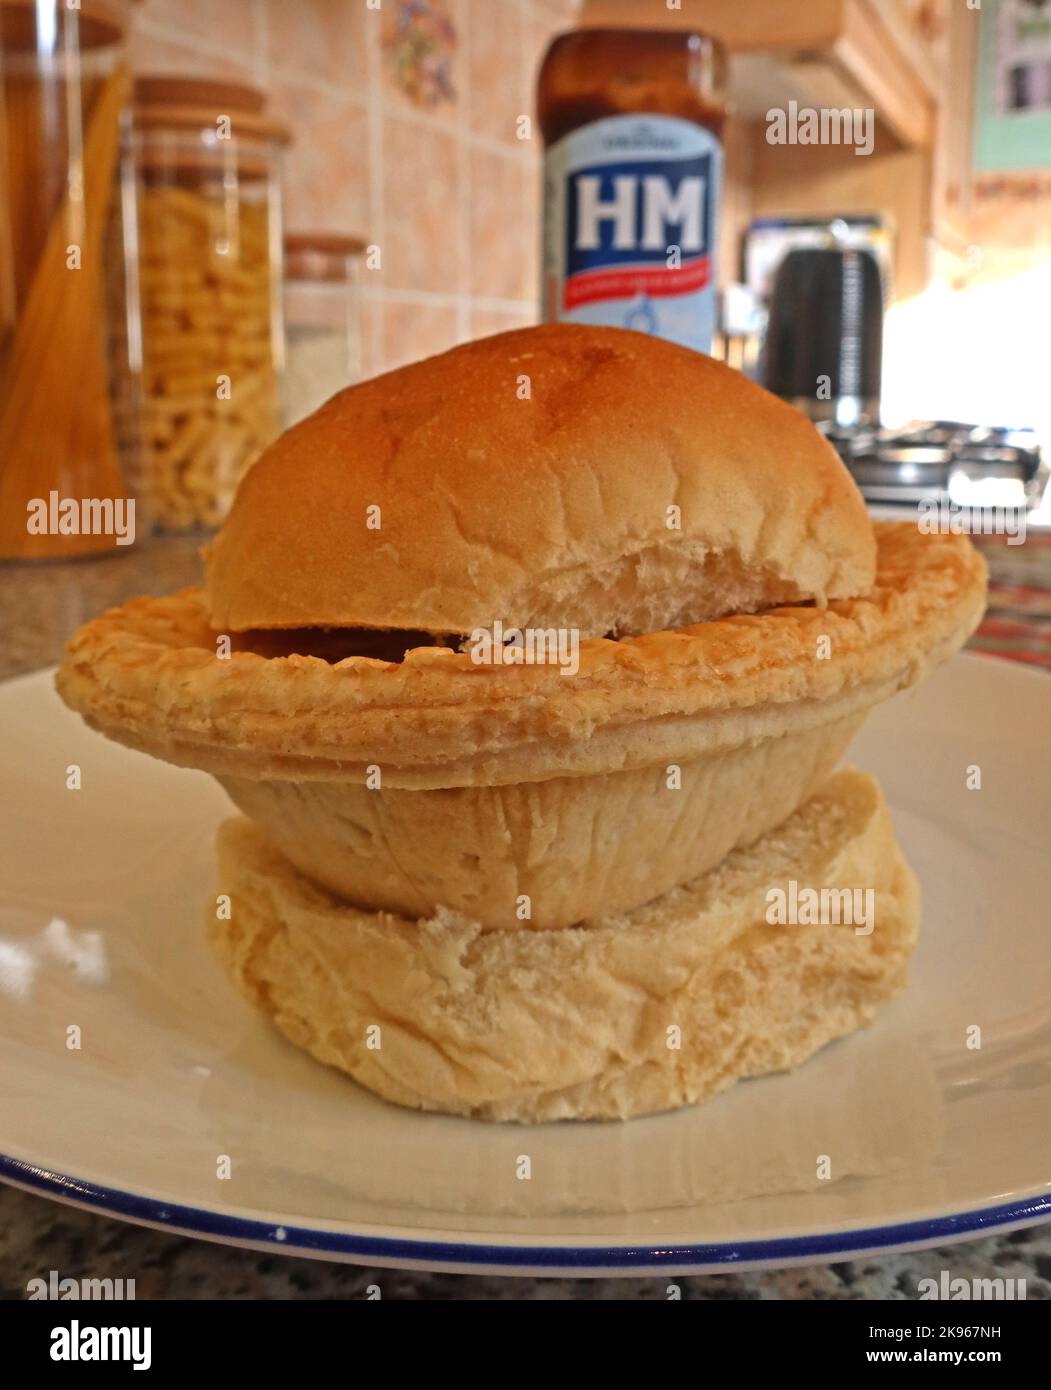 Wigan Lancashire Pie Burger, a steak or Meat pie on a oven bottom muffin, with HP Sauce bottle - Northern North West British comfort food, UK Stock Photo